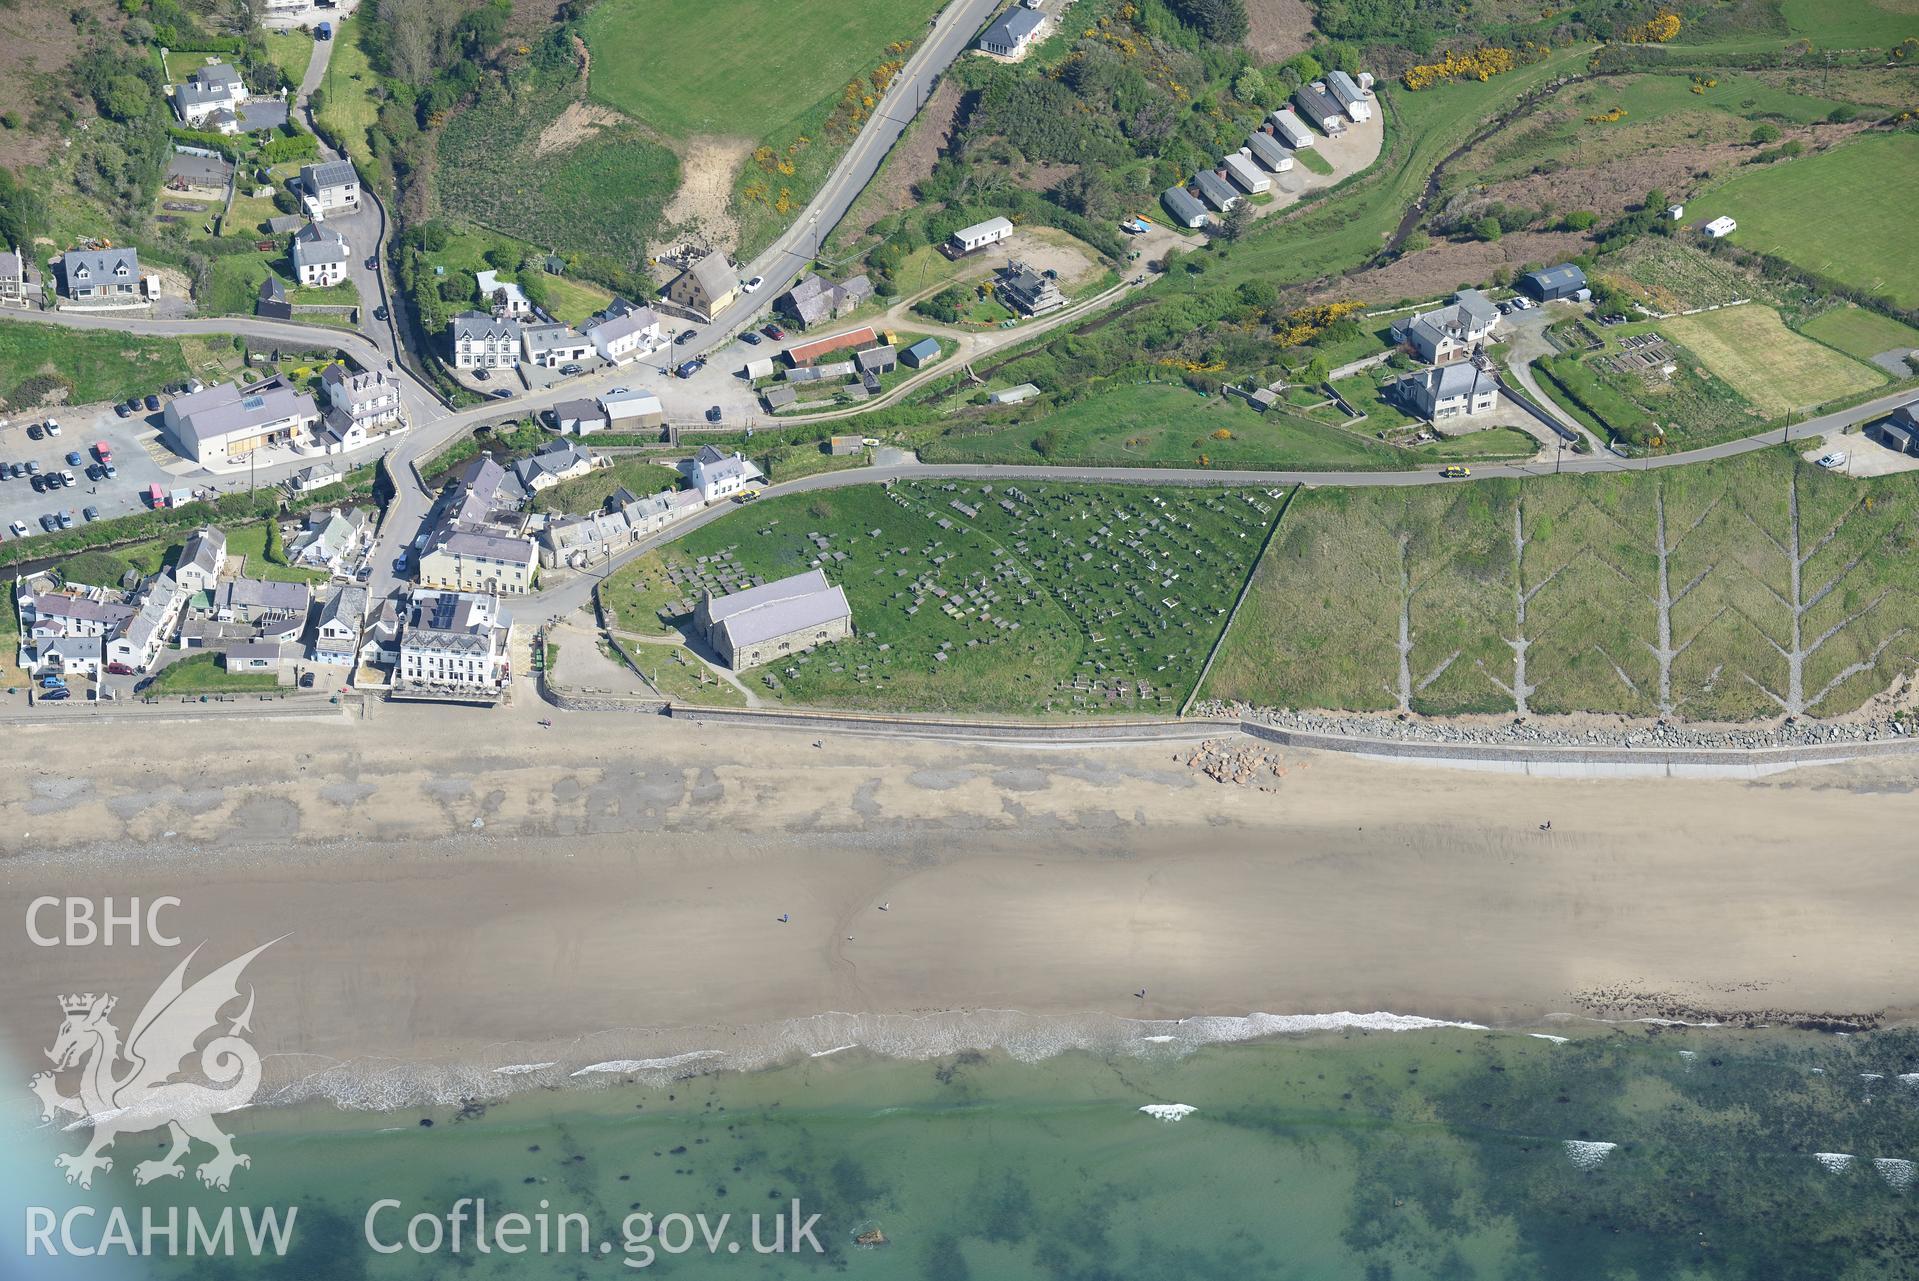 Aerial photography of Aberdaron taken on 3rd May 2017.  Baseline aerial reconnaissance survey for the CHERISH Project. ? Crown: CHERISH PROJECT 2017. Produced with EU funds through the Ireland Wales Co-operation Programme 2014-2020. All material made fre